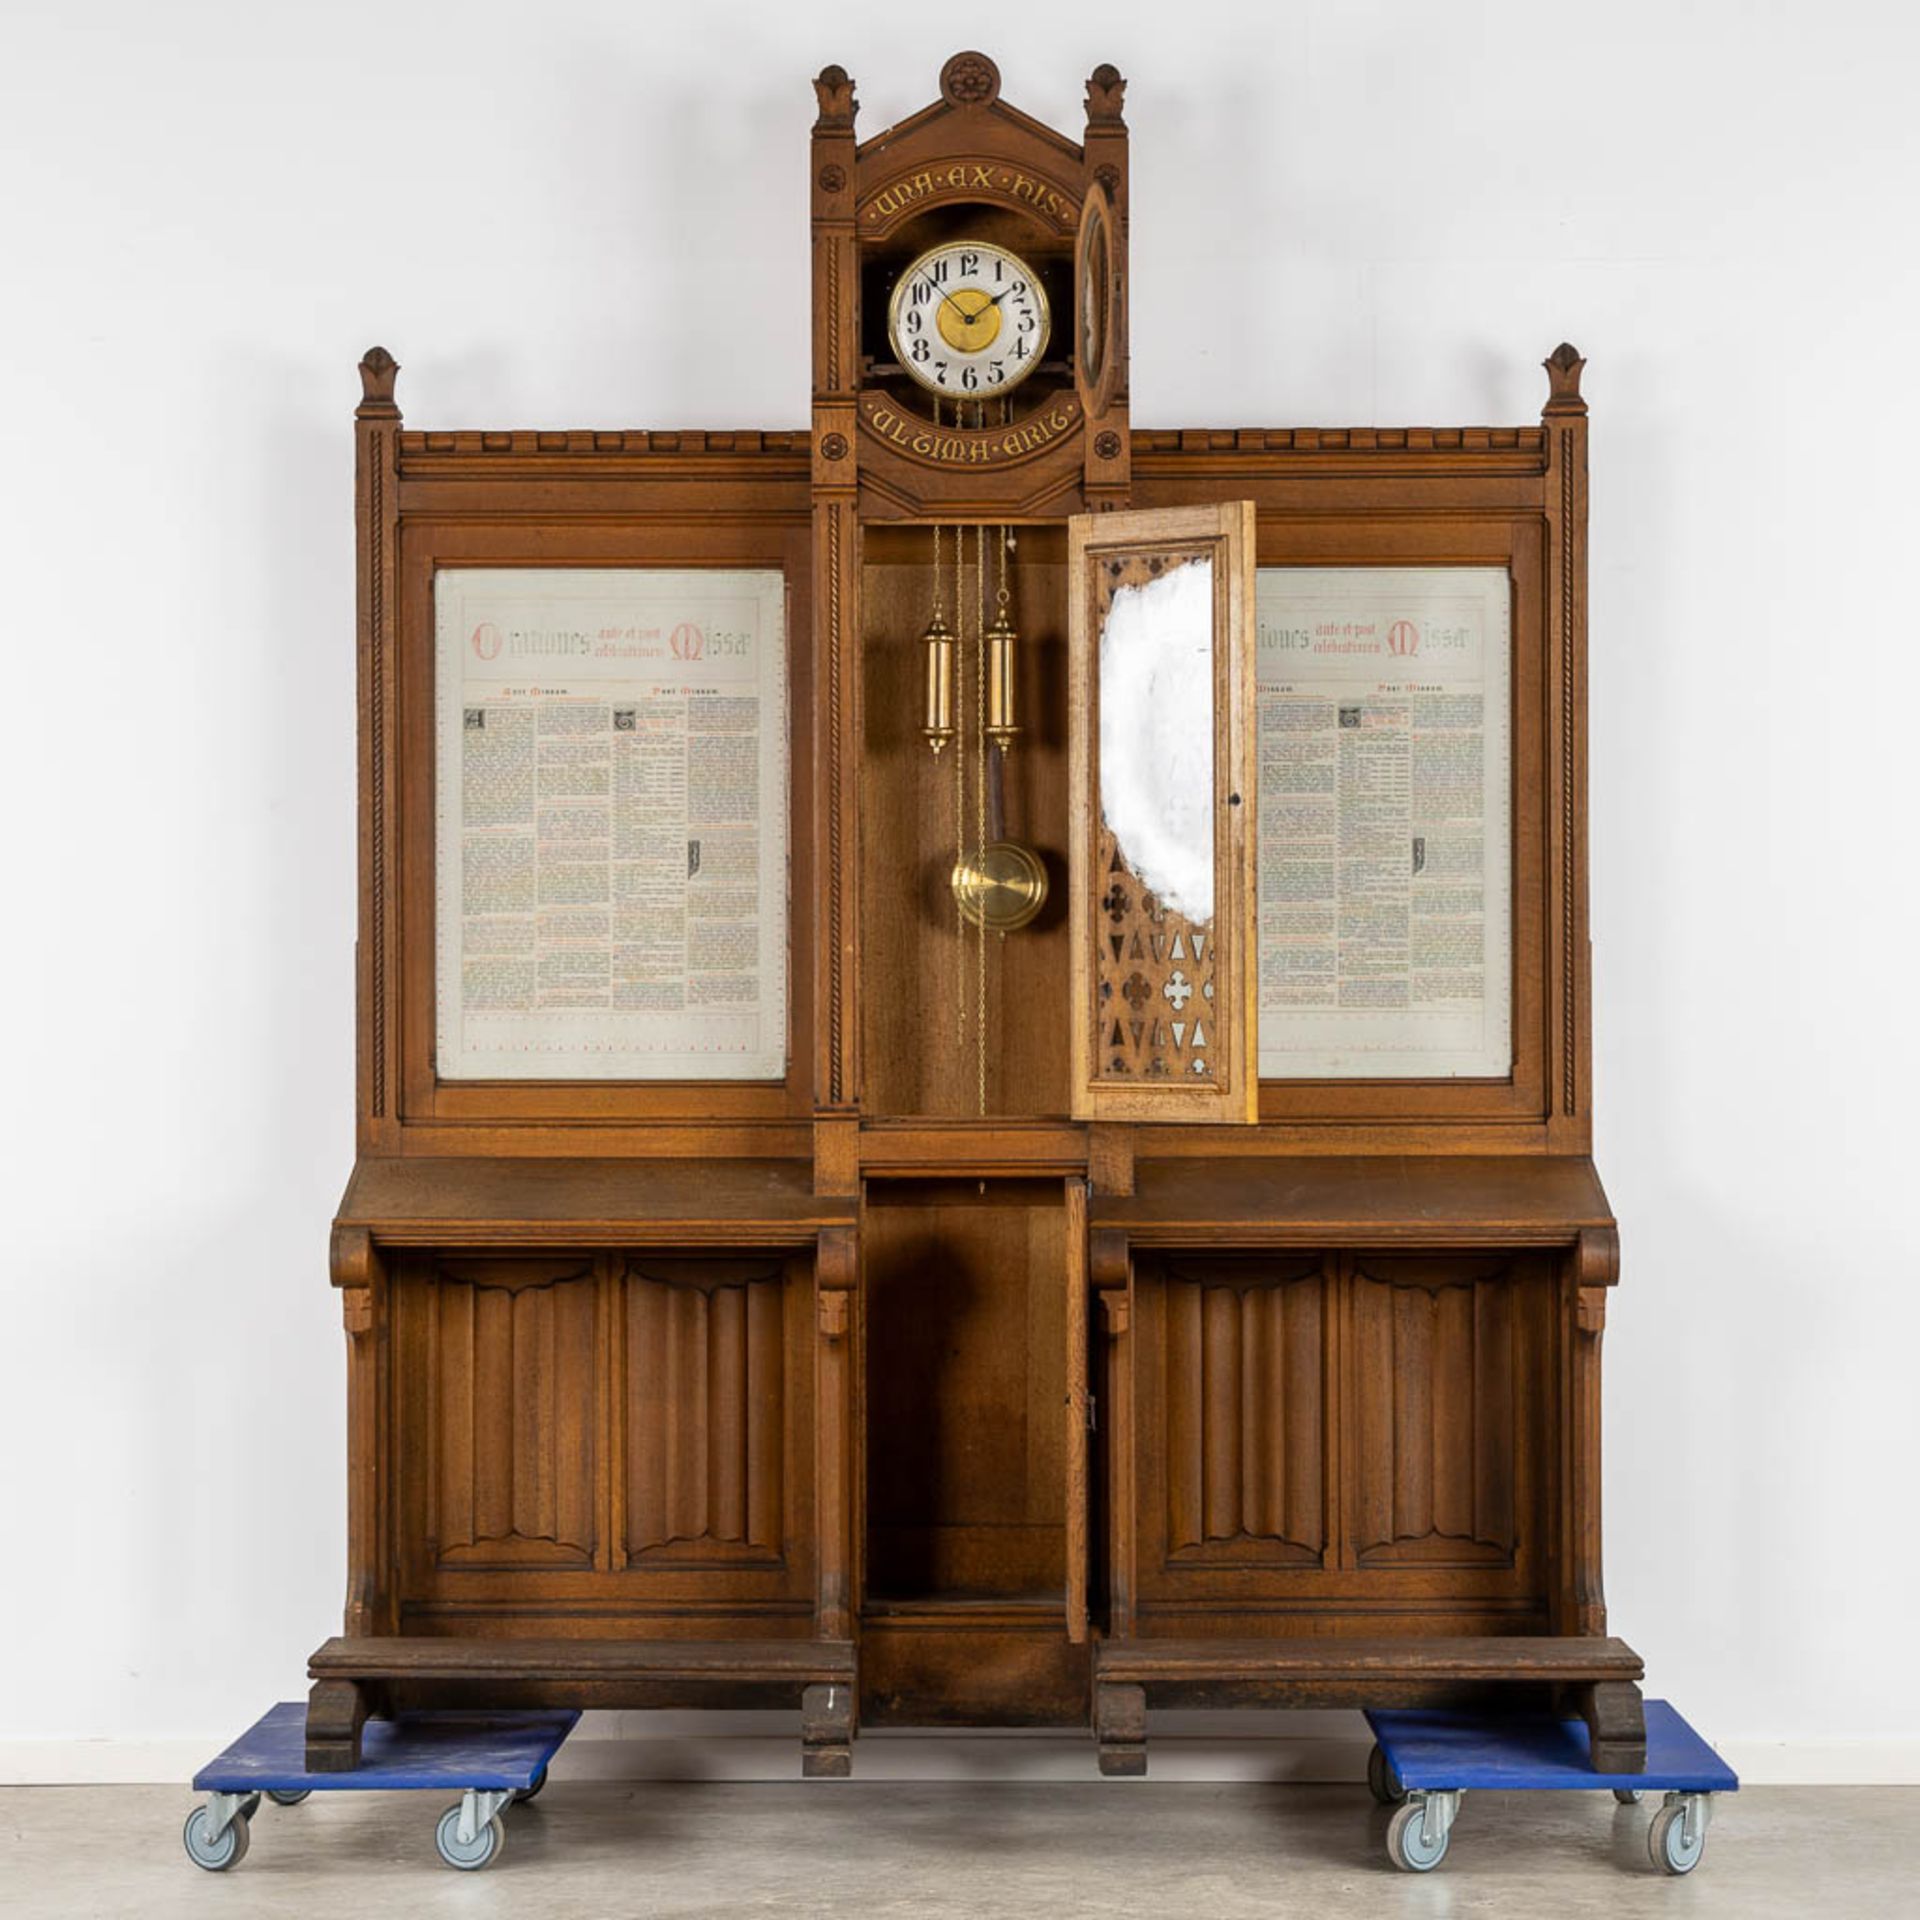 A Gotic Revival prayer bench and standing clock, Finished with Canon Boards, Oak, Circa 1900. (H:258 - Image 3 of 8